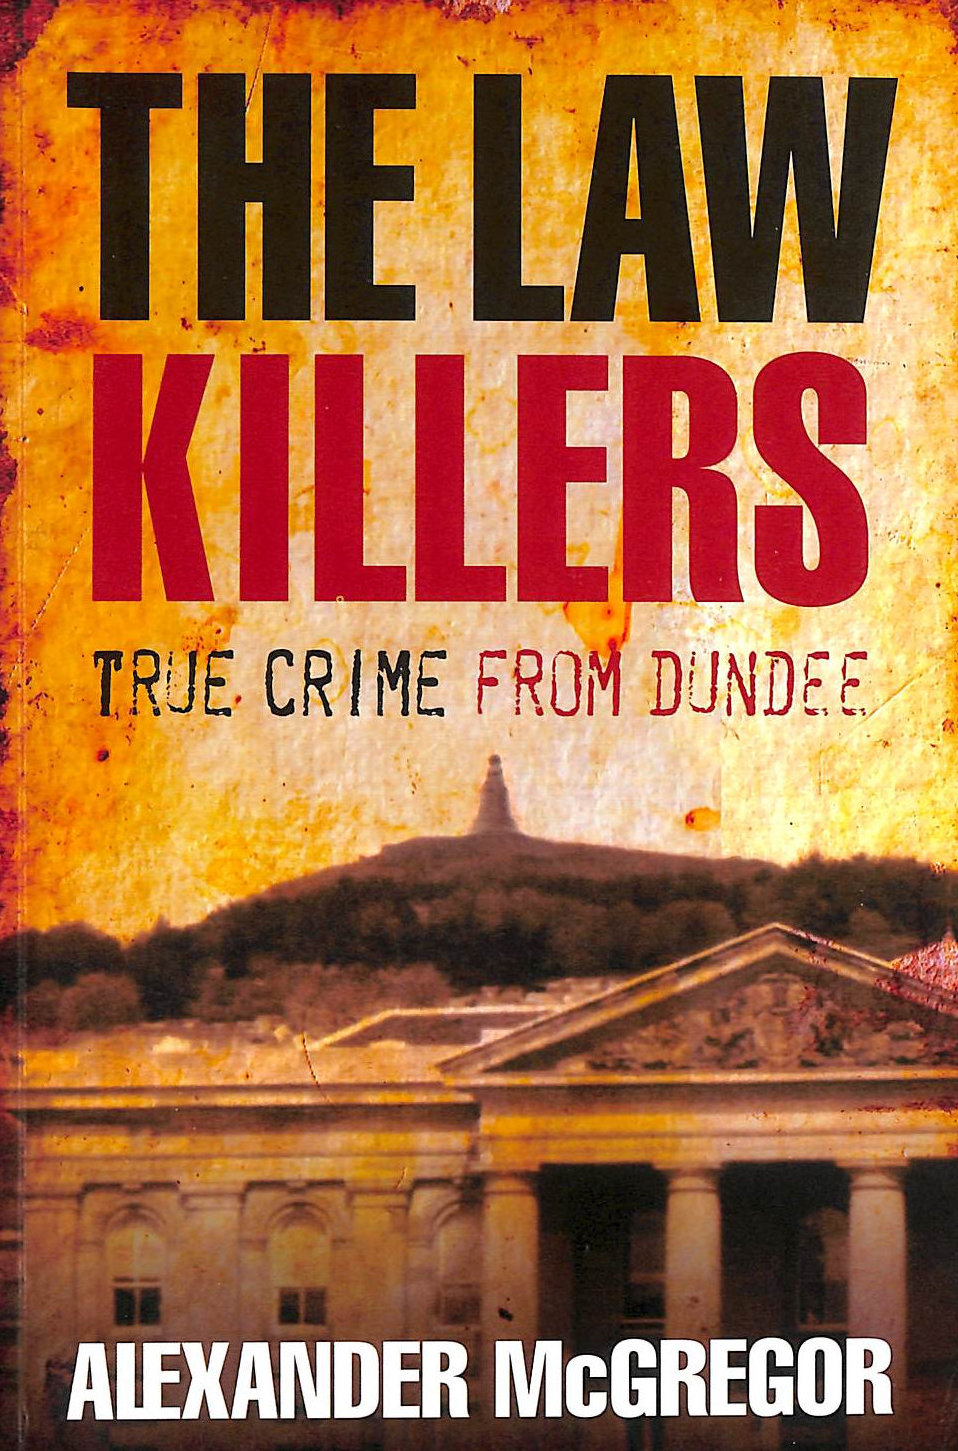 MCGREGOR, ALEXANDER - The Law Killers: True Crime from Dundee